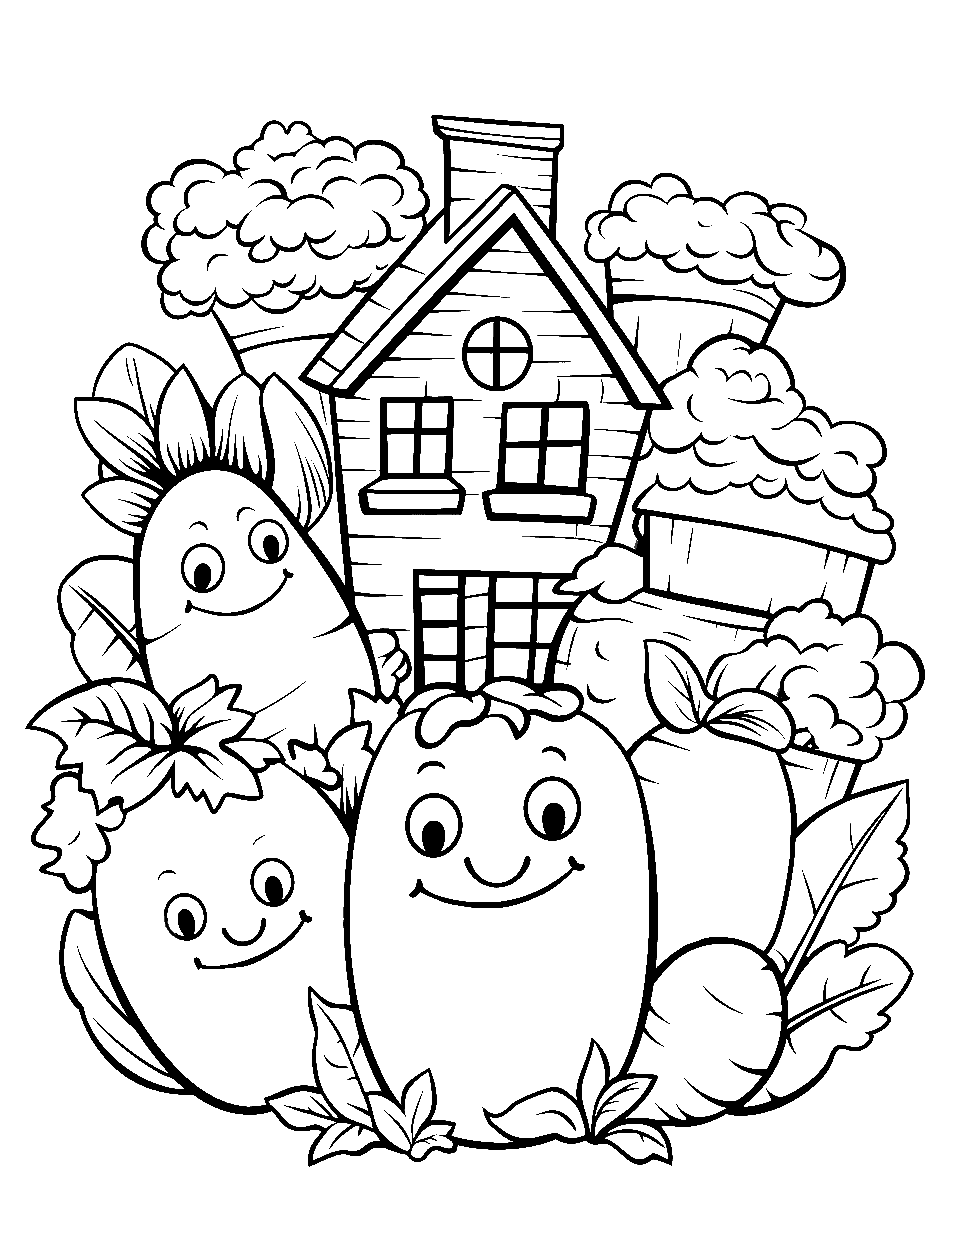 Vegetable Village Coloring Page - Various vegetables with faces forming a village.